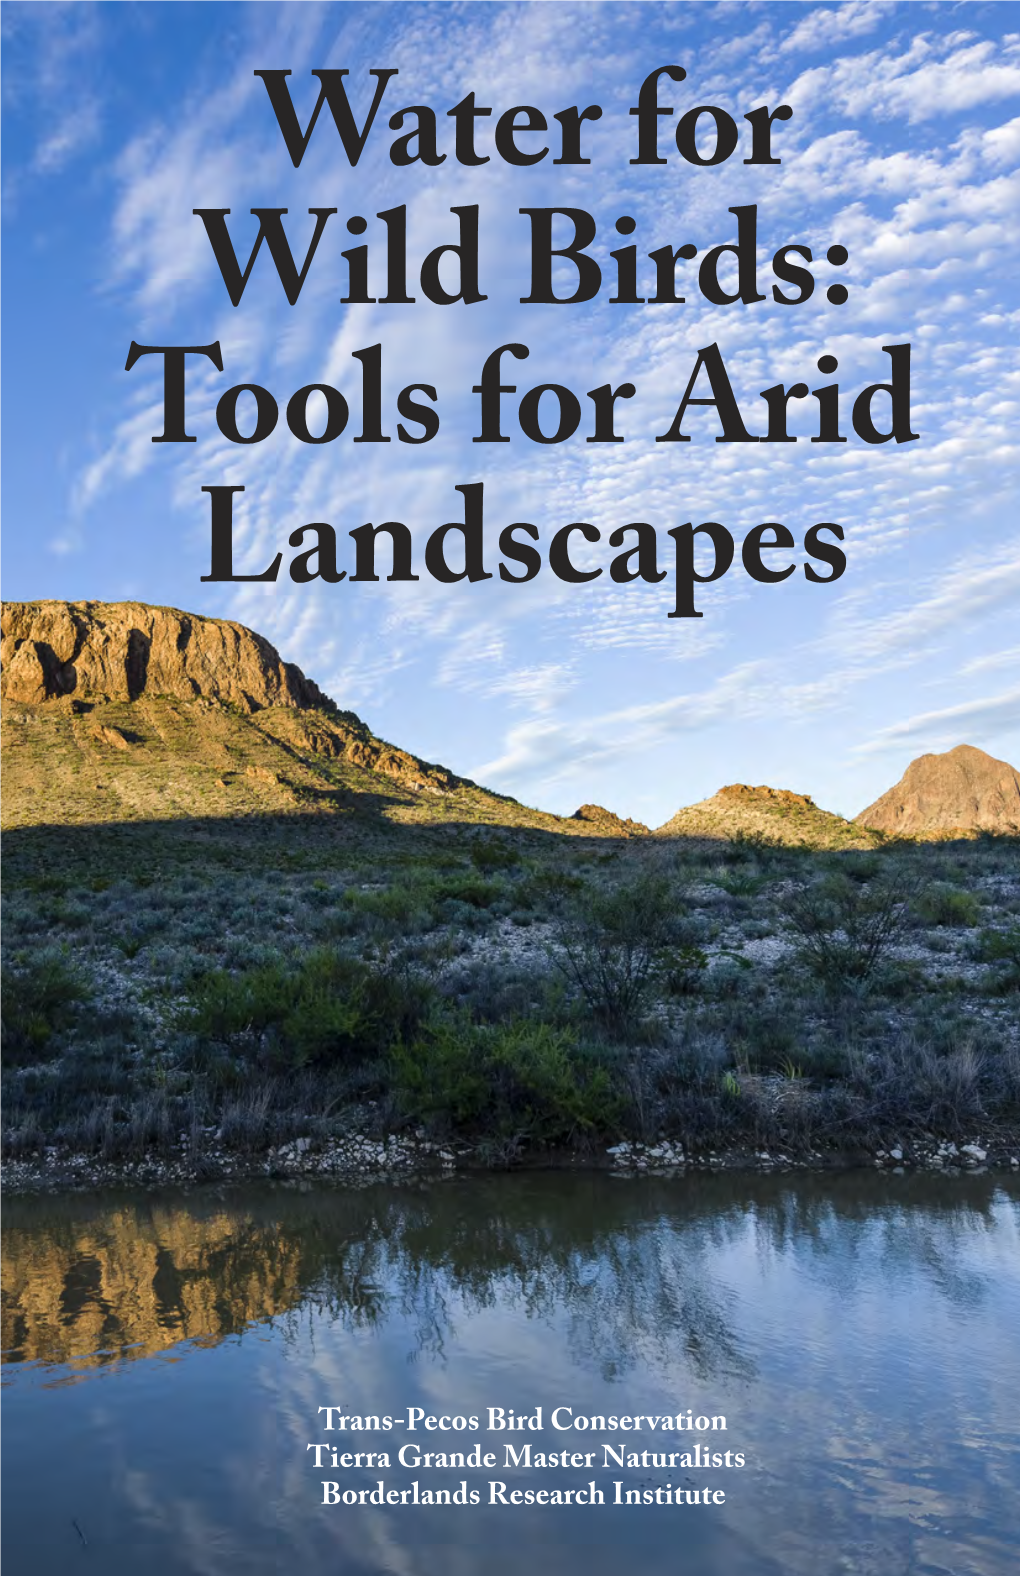 Water for Wild Birds: Tools for Arid Landscapes